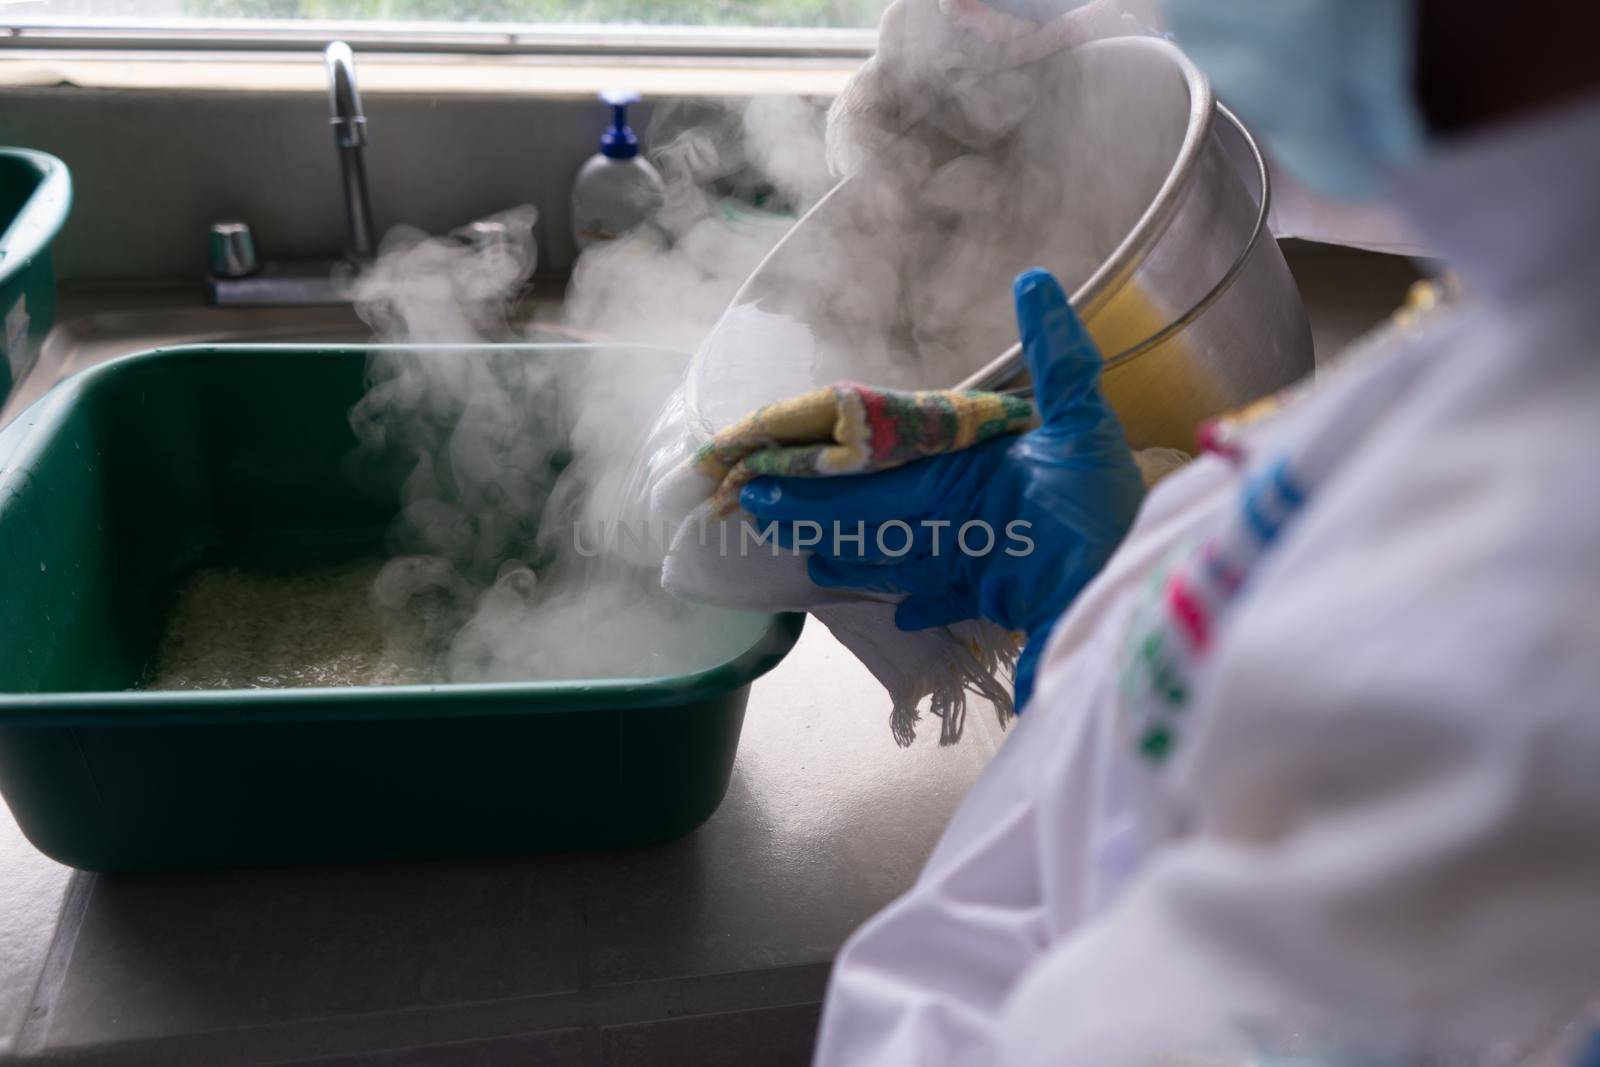 Precooking process for the production of medicinal mushrooms in a laboratory. Latina scientist puts boiling water during a chemical process